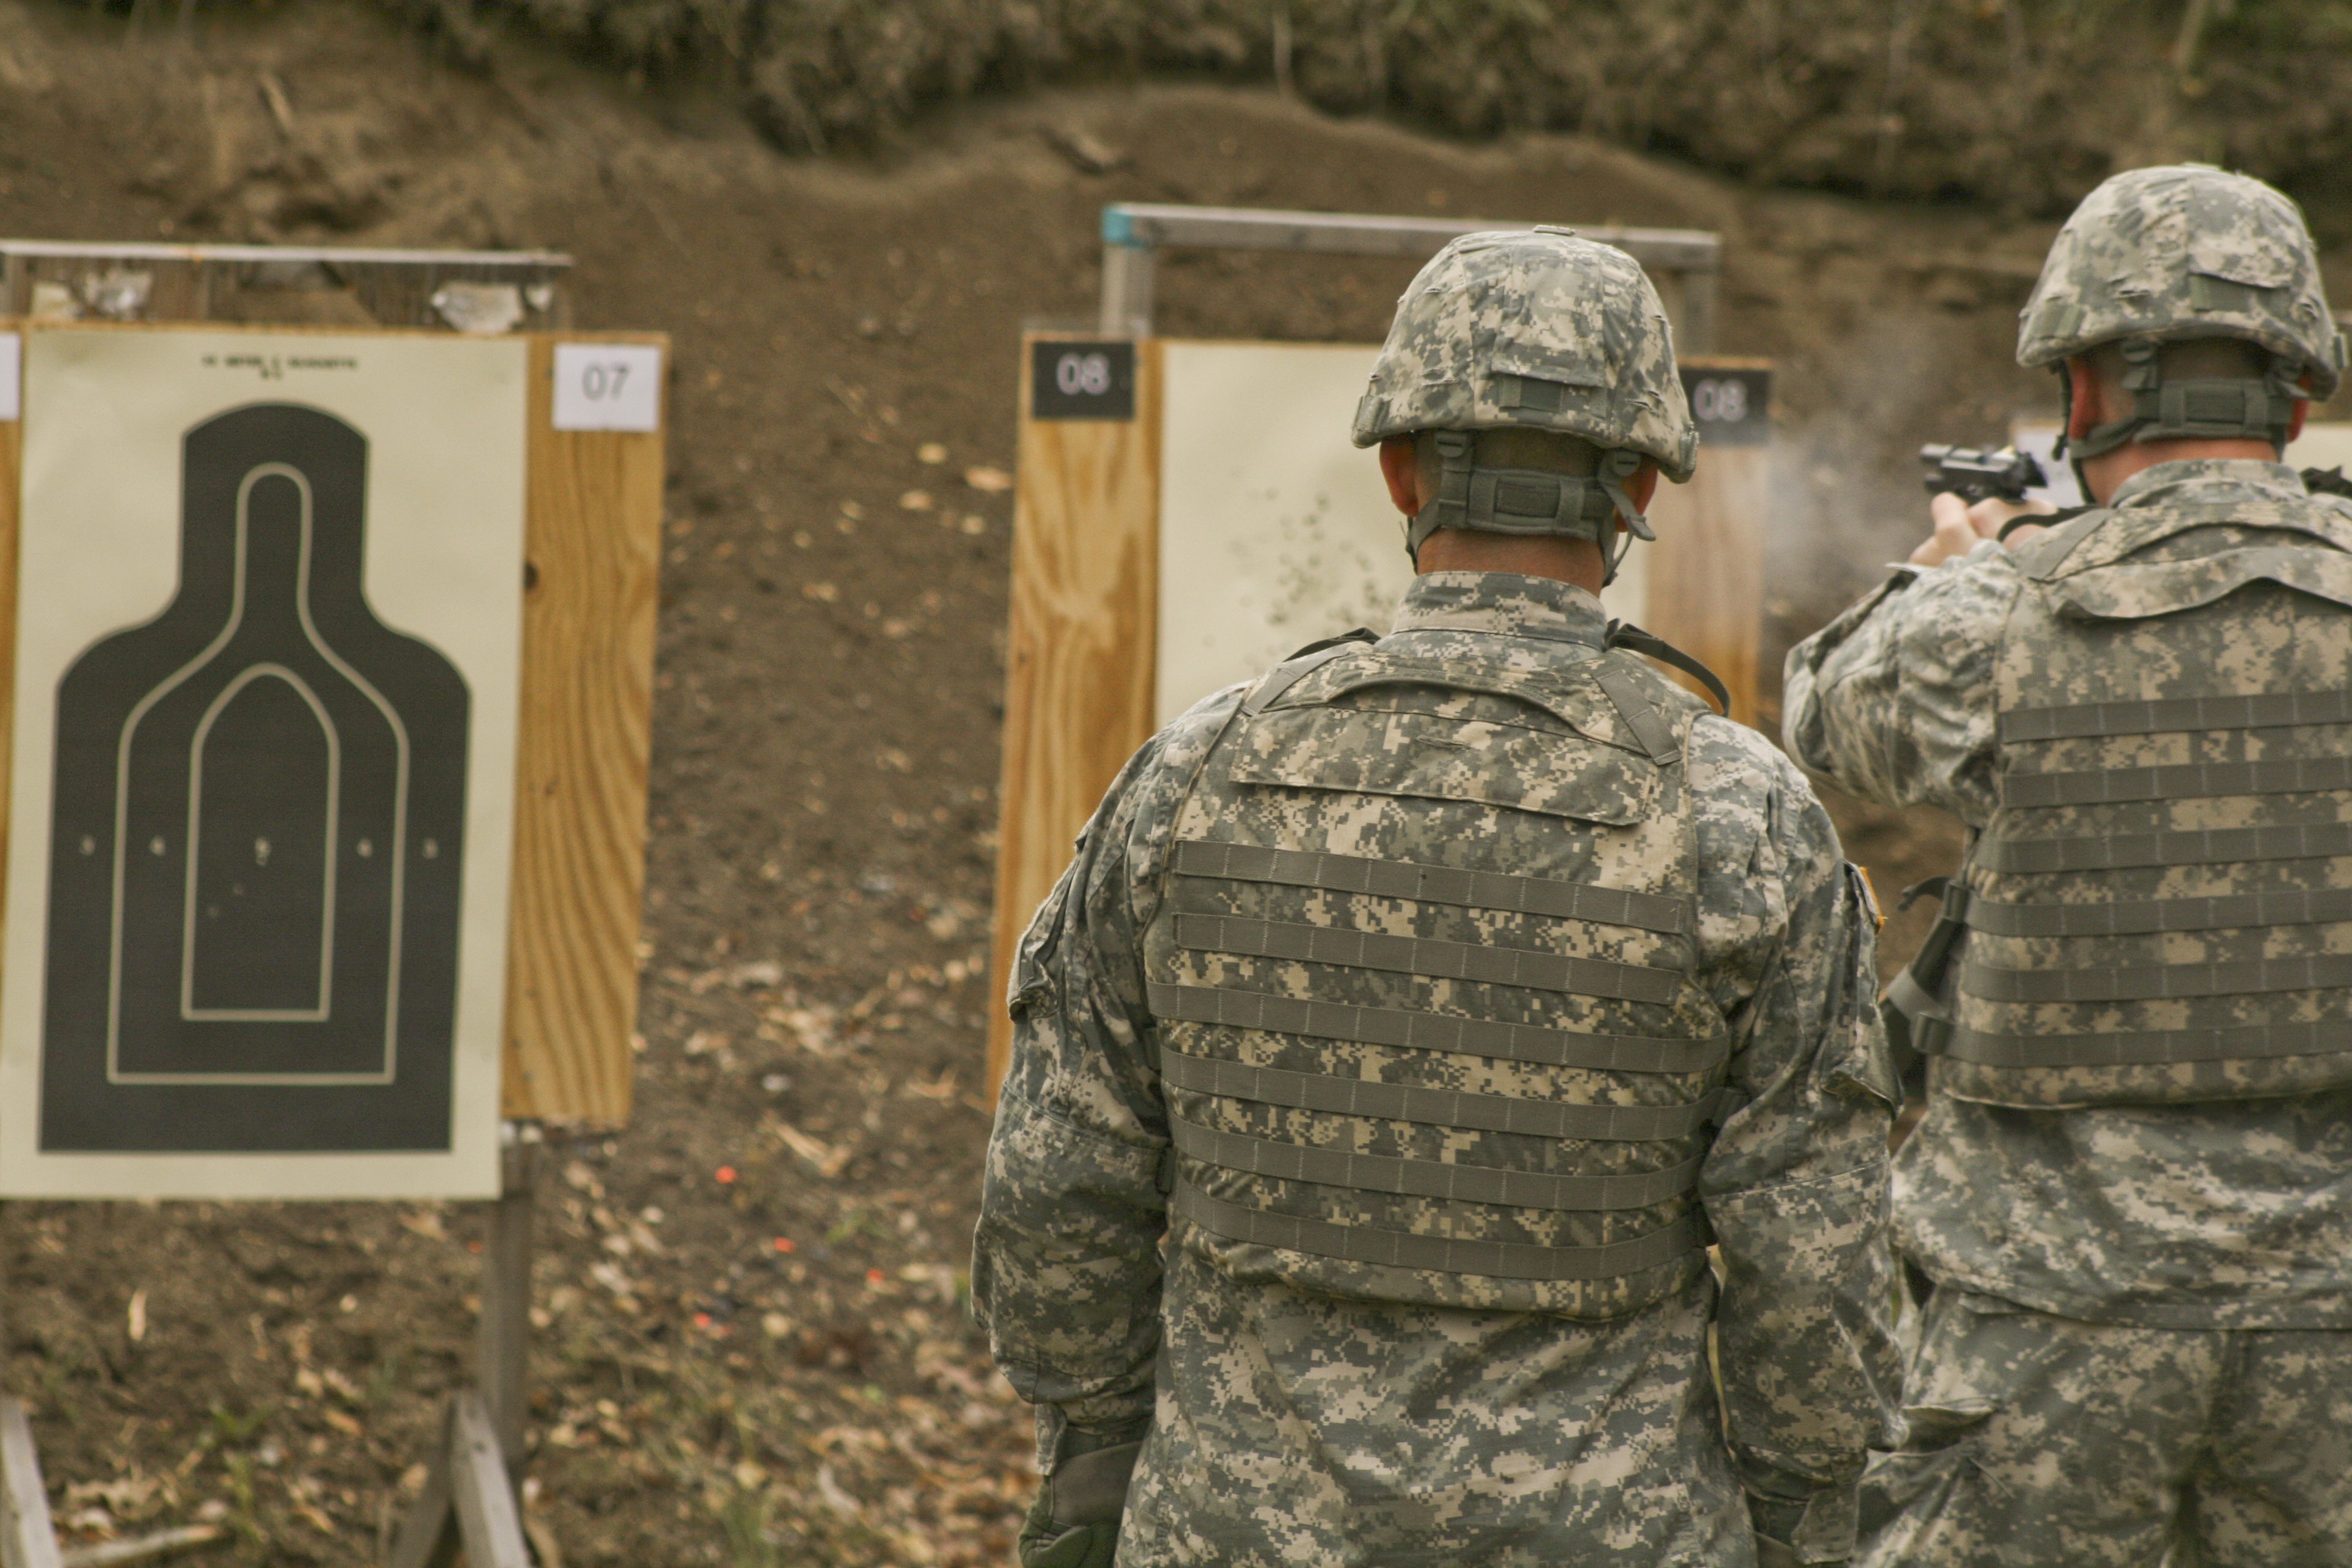 Weapons Qualification Article The United States Army